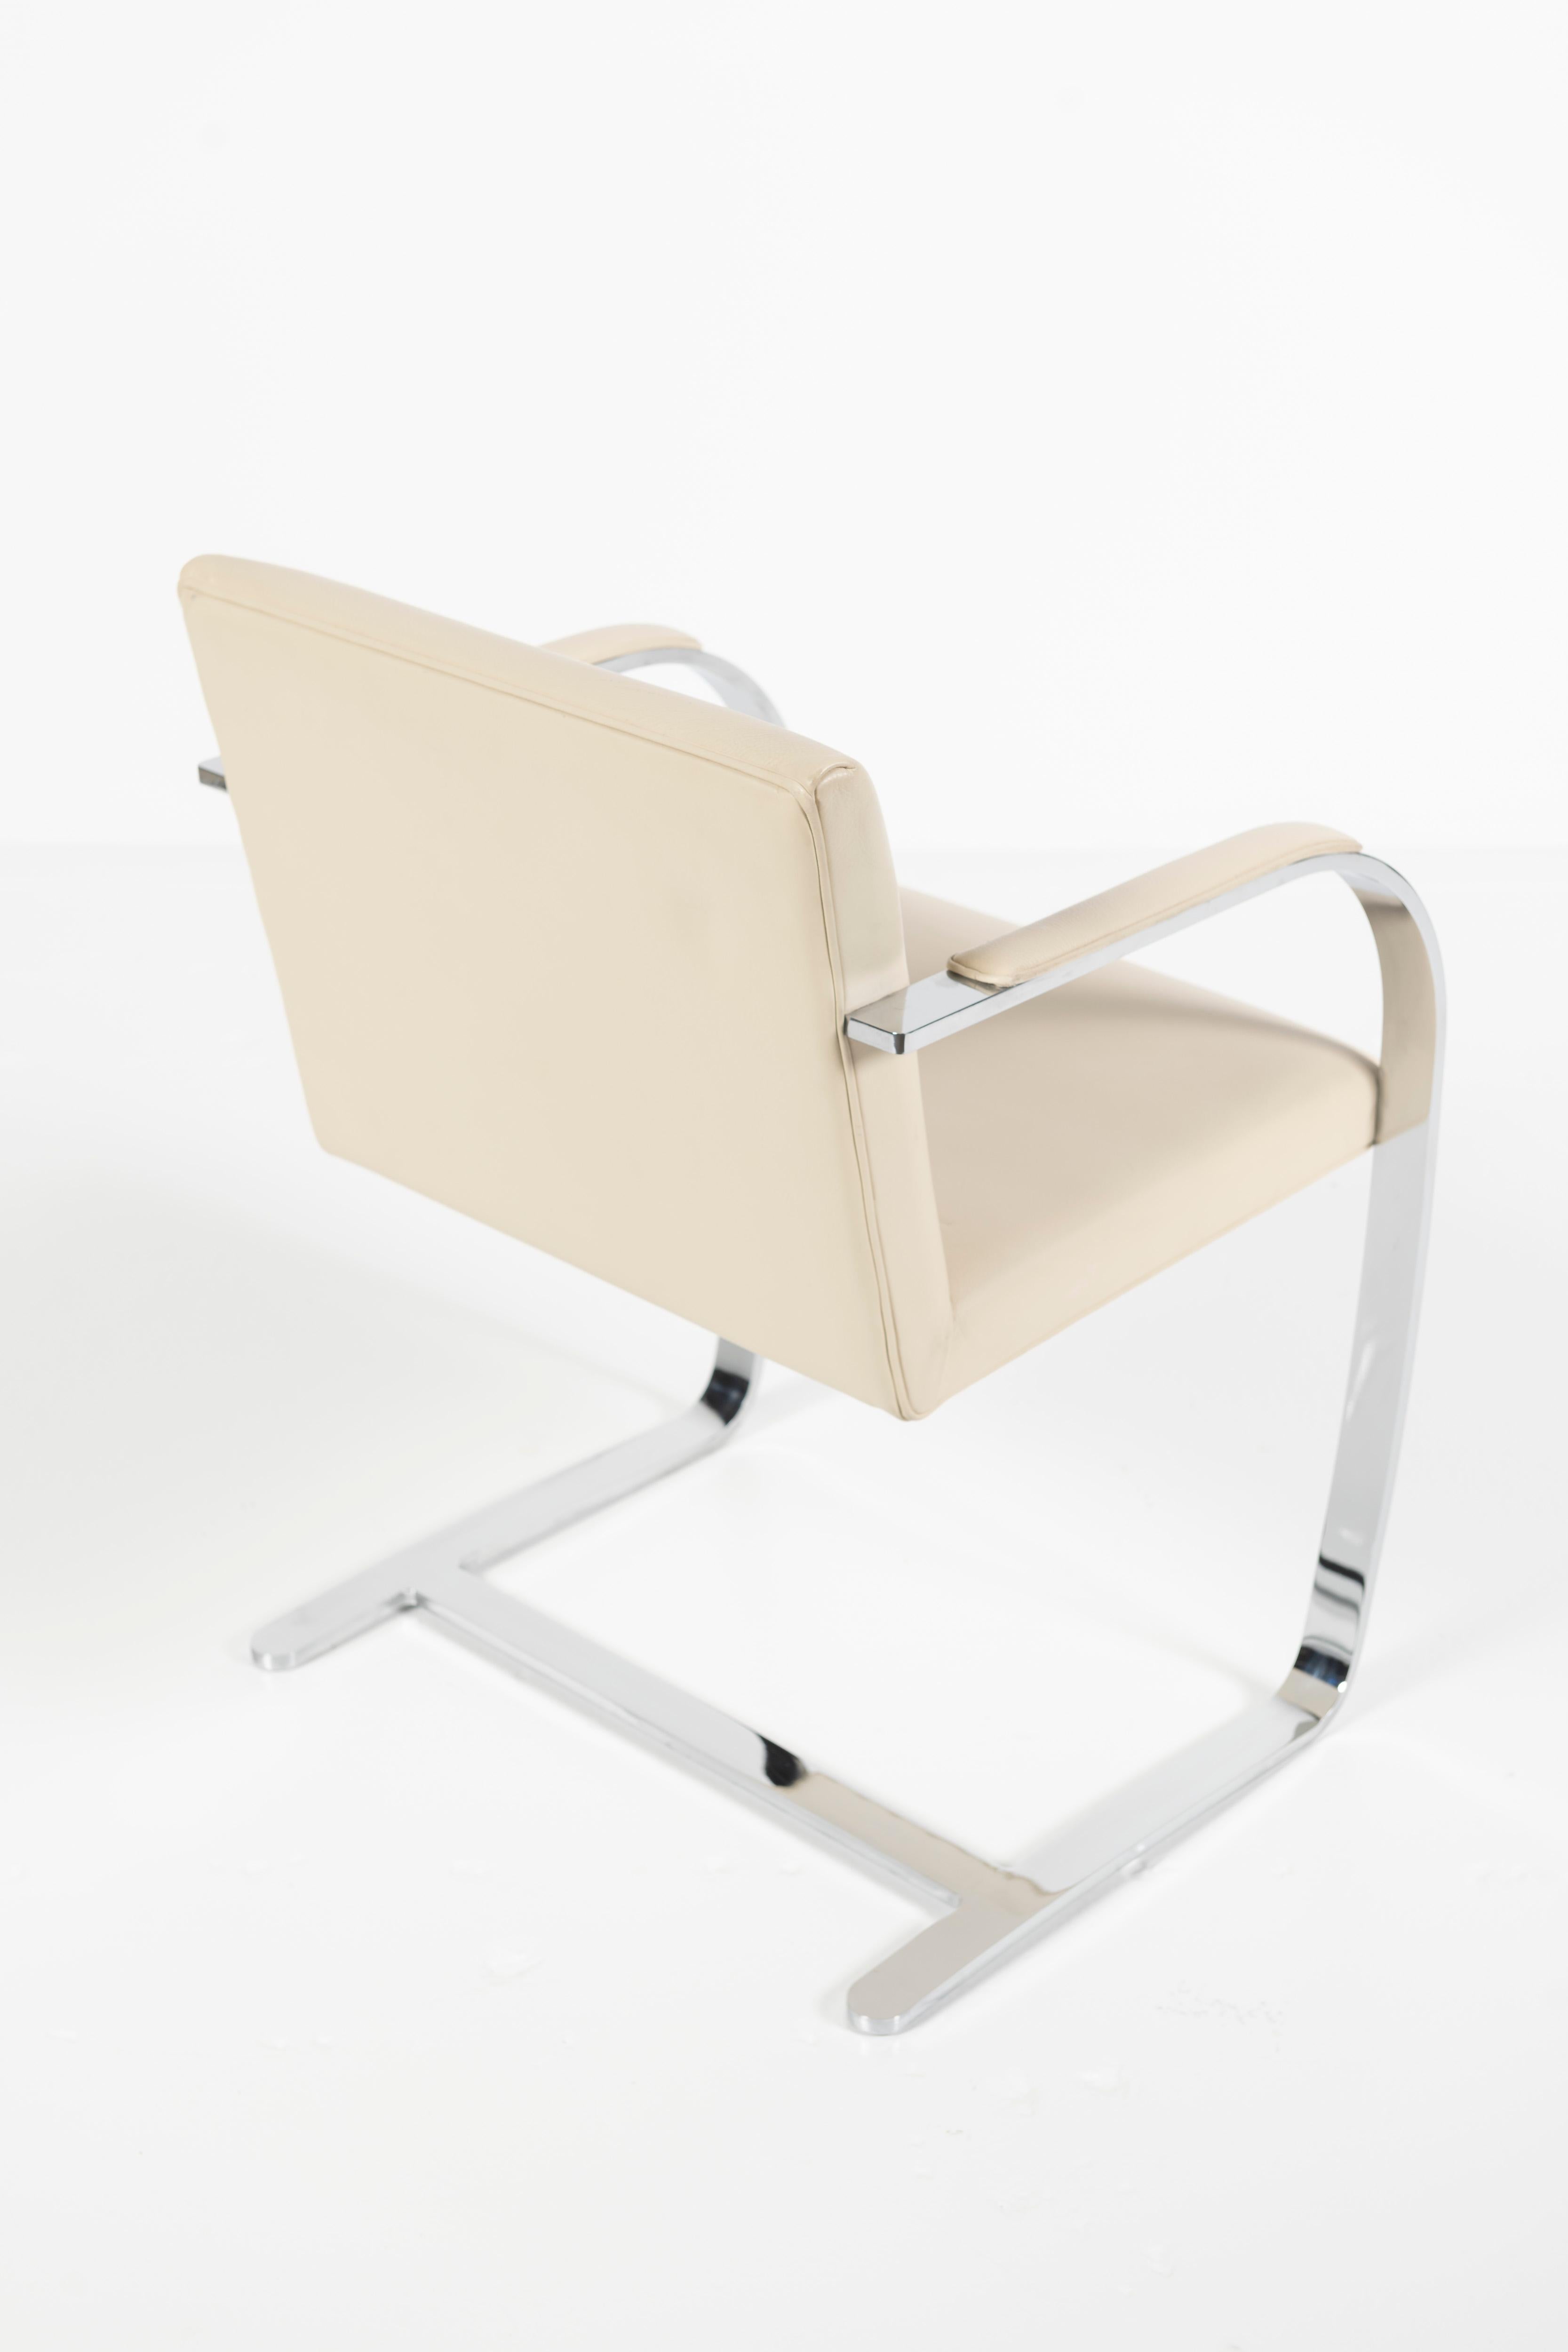 20th Century Flat Bar Armchair in Cream Leather and Chrome, in the style of Mies van der Rohe For Sale